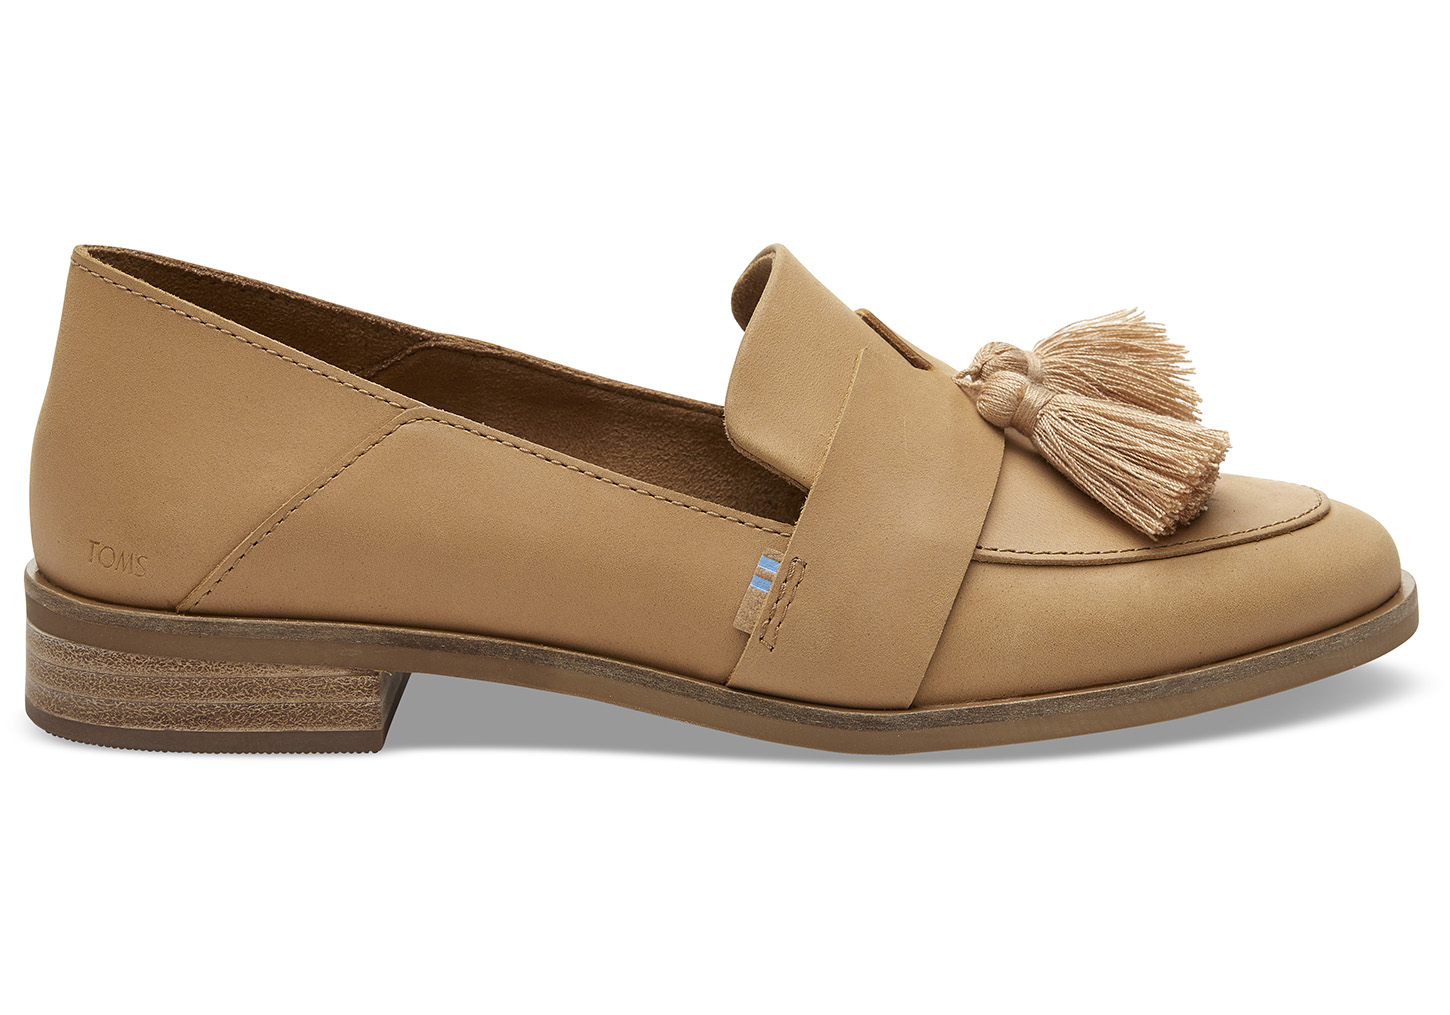 toms shoes with tassels